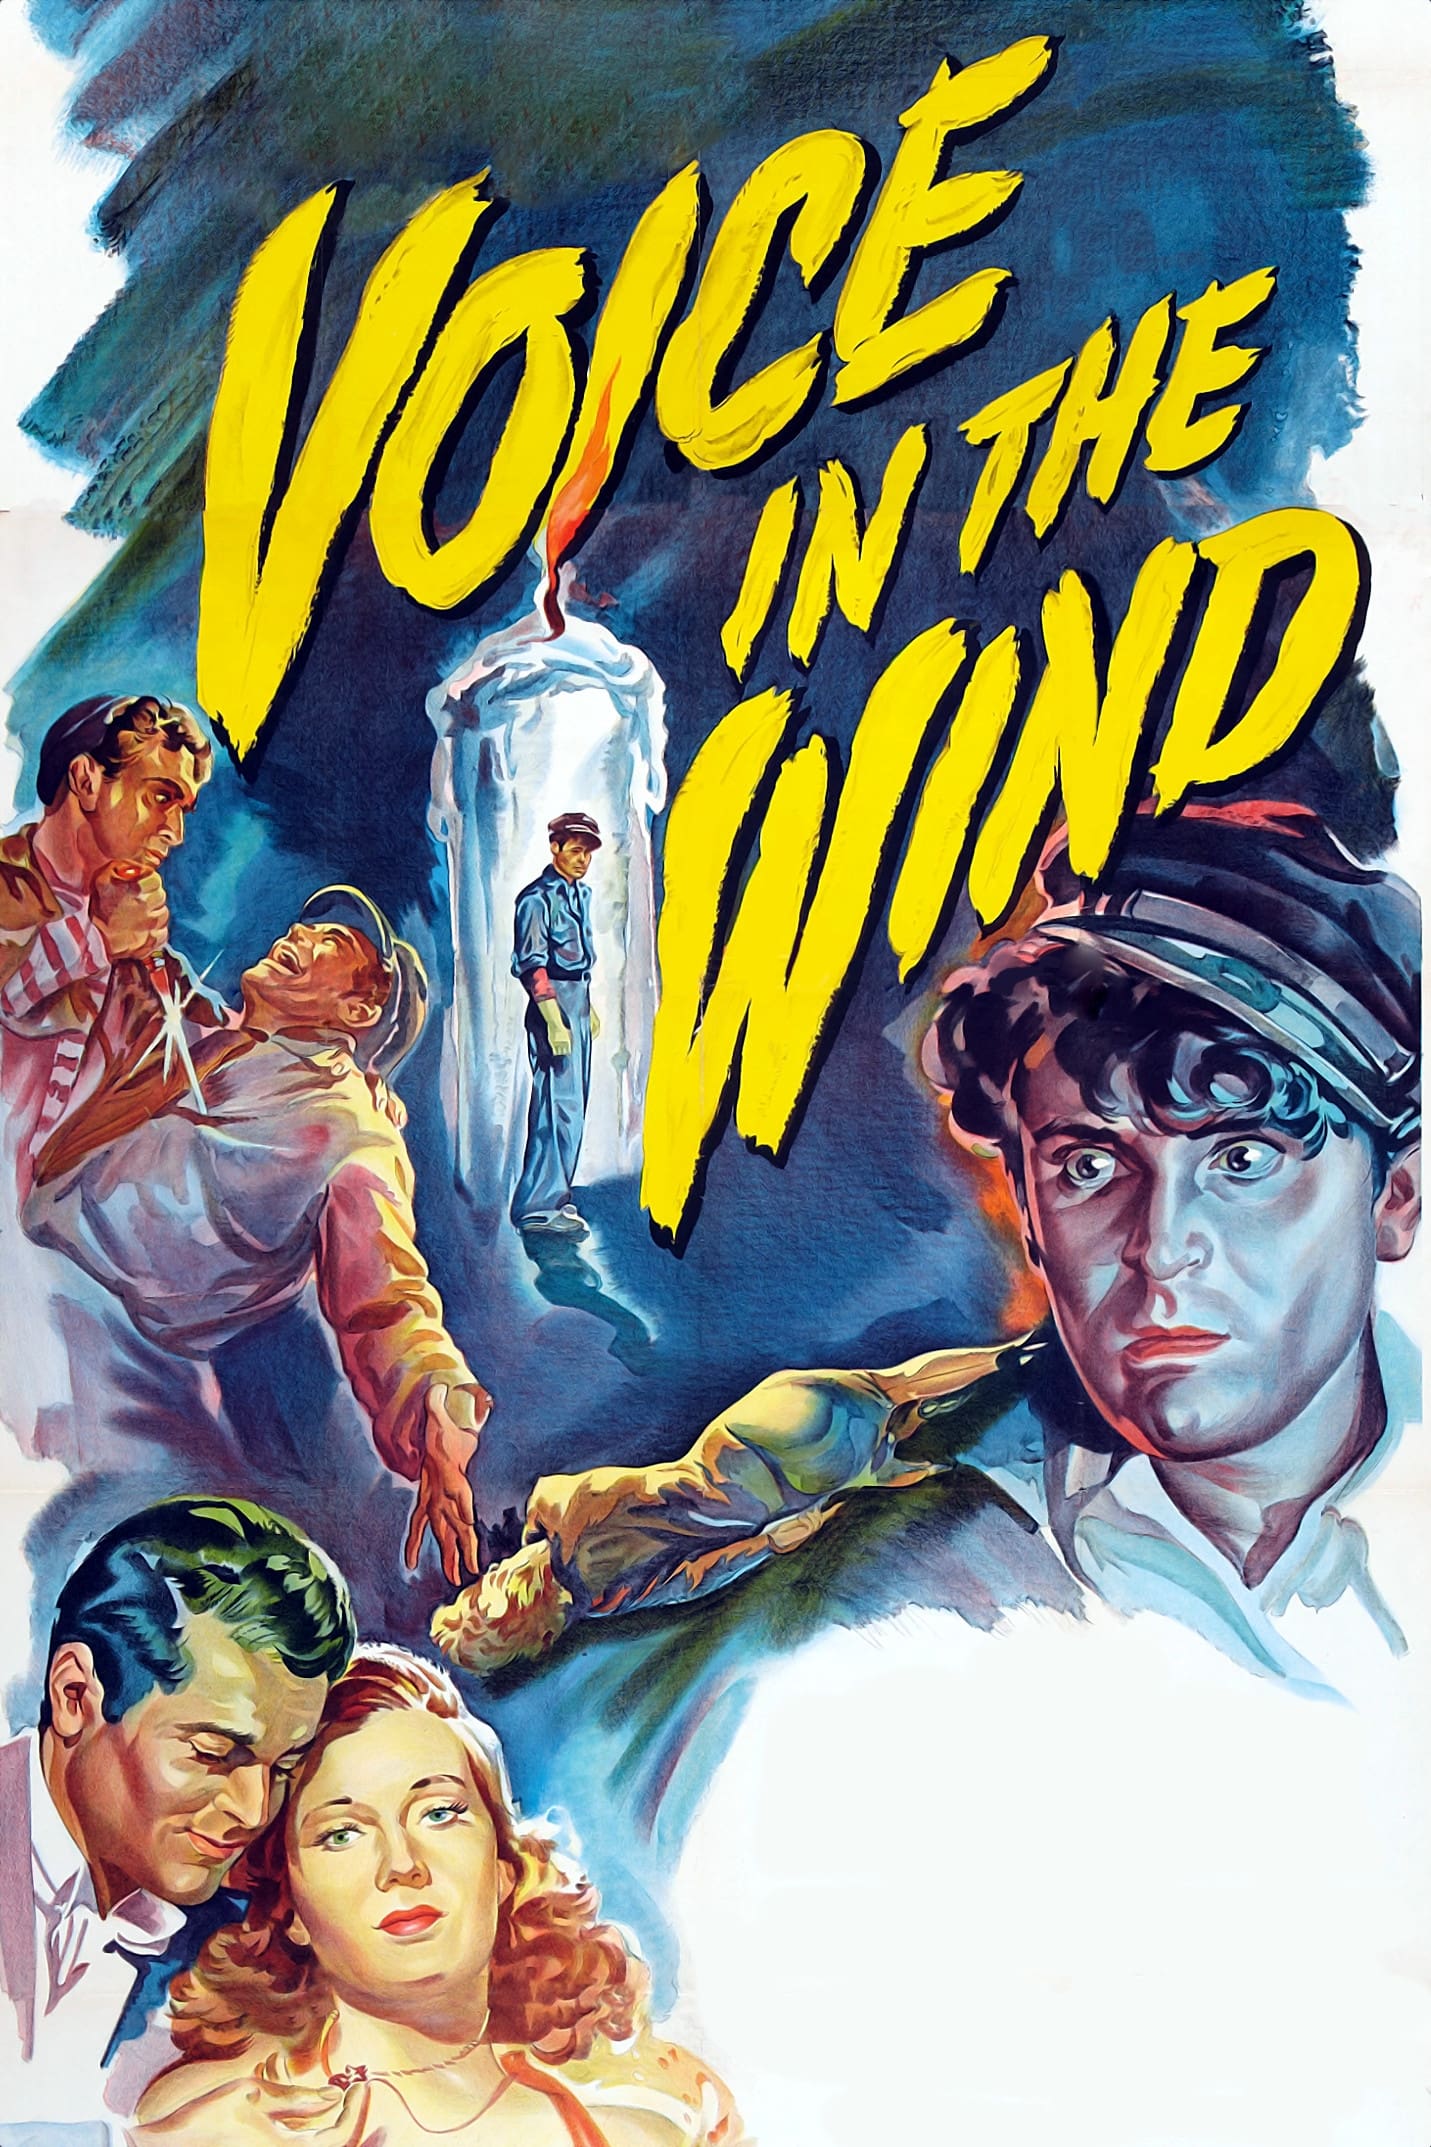 Voice in the Wind (1944)